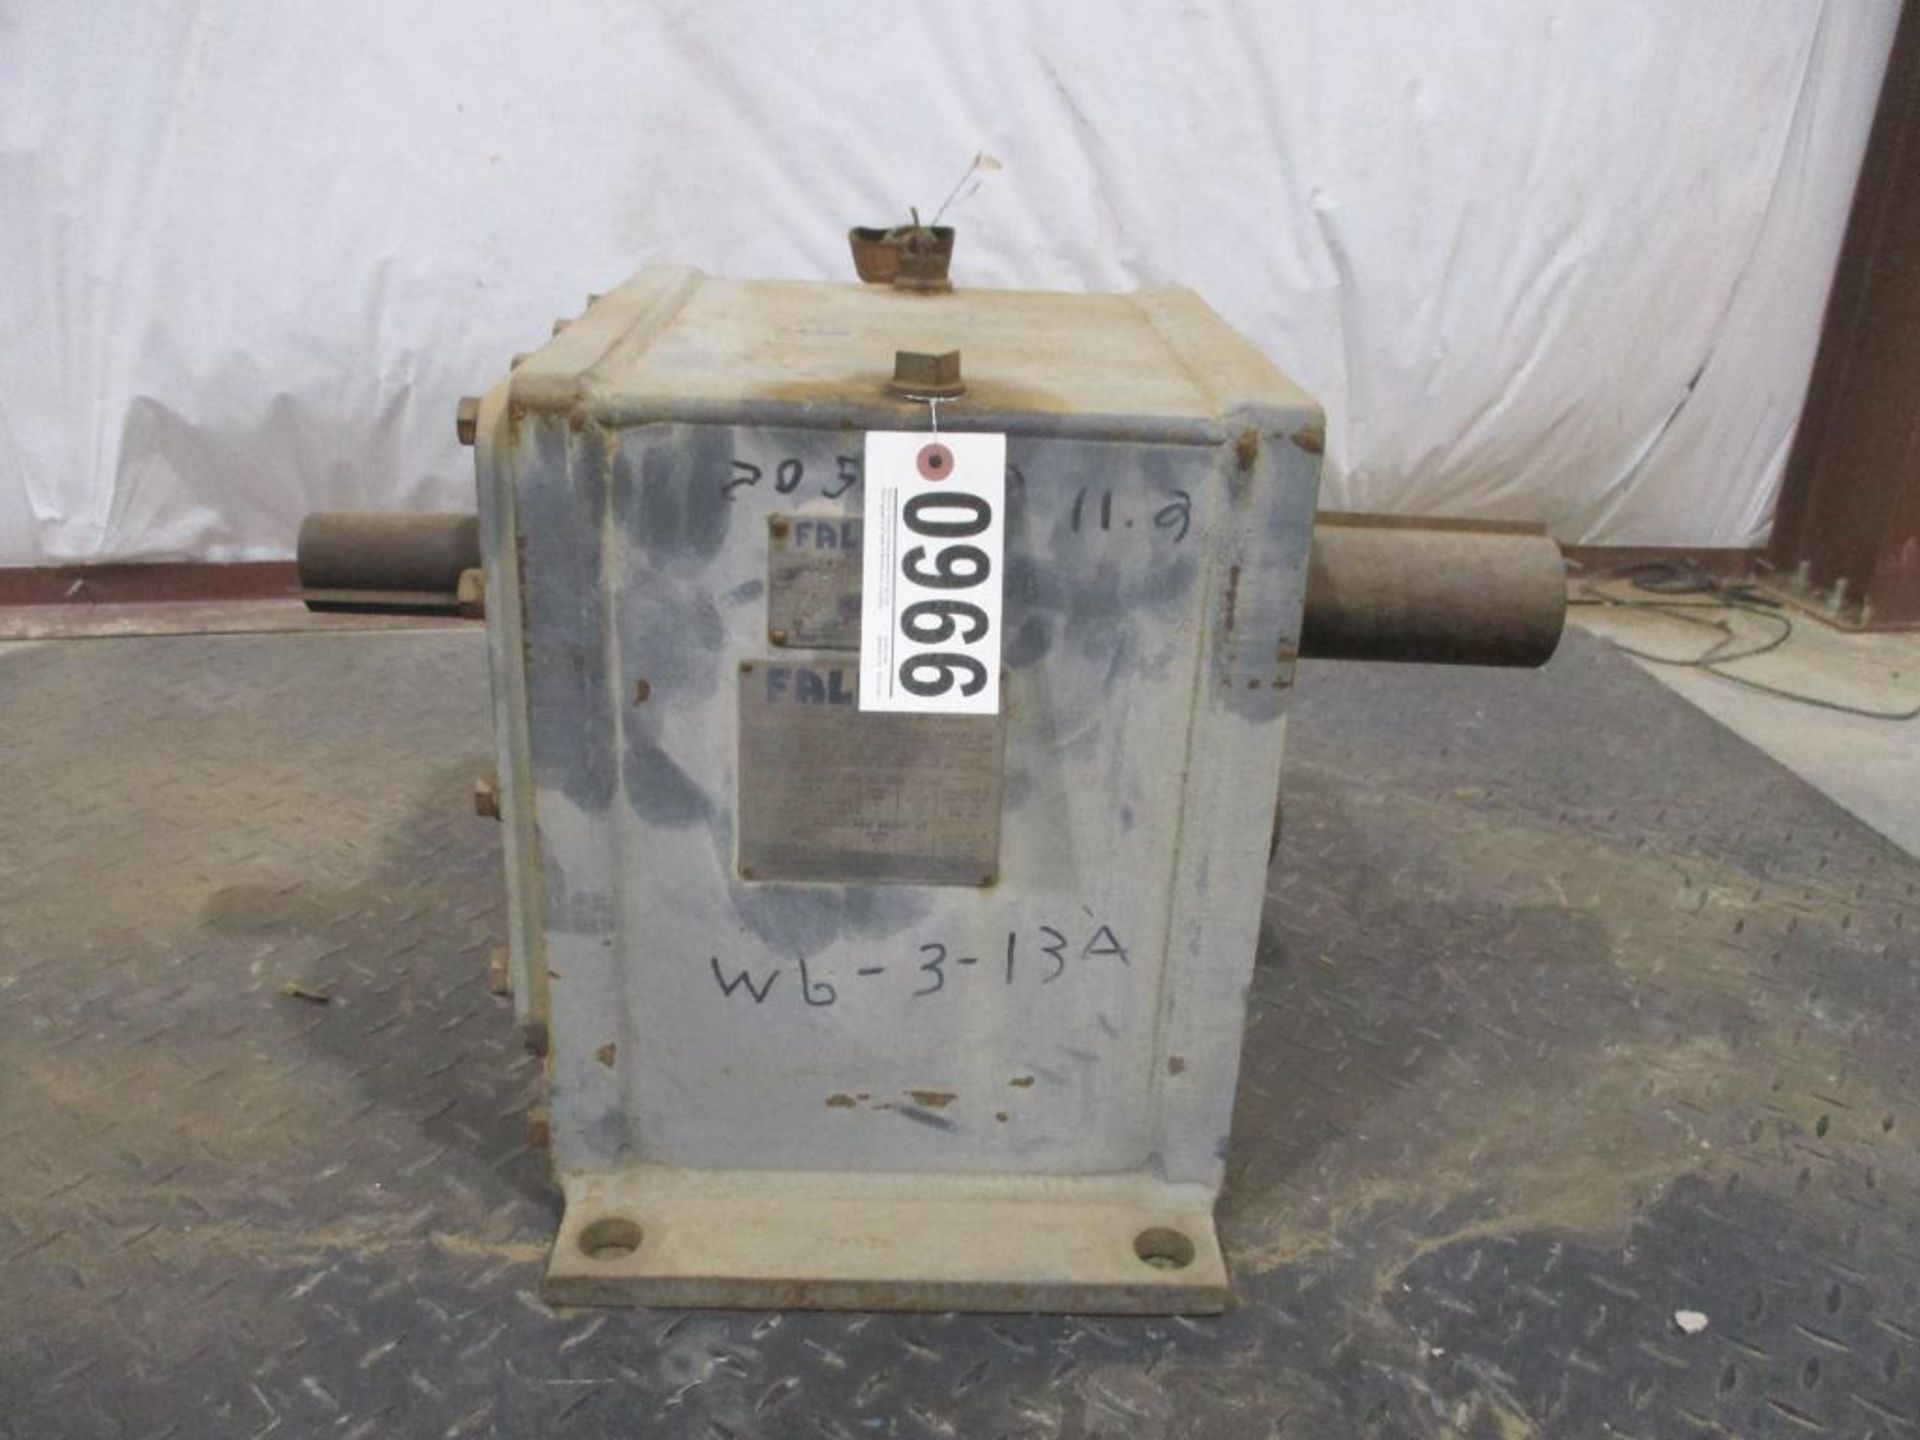 FALK 1126 RATIO REDUCER P/N RK2060F2A, 419# lbs (There will be a $40 Rigging/Prep fee added to the i